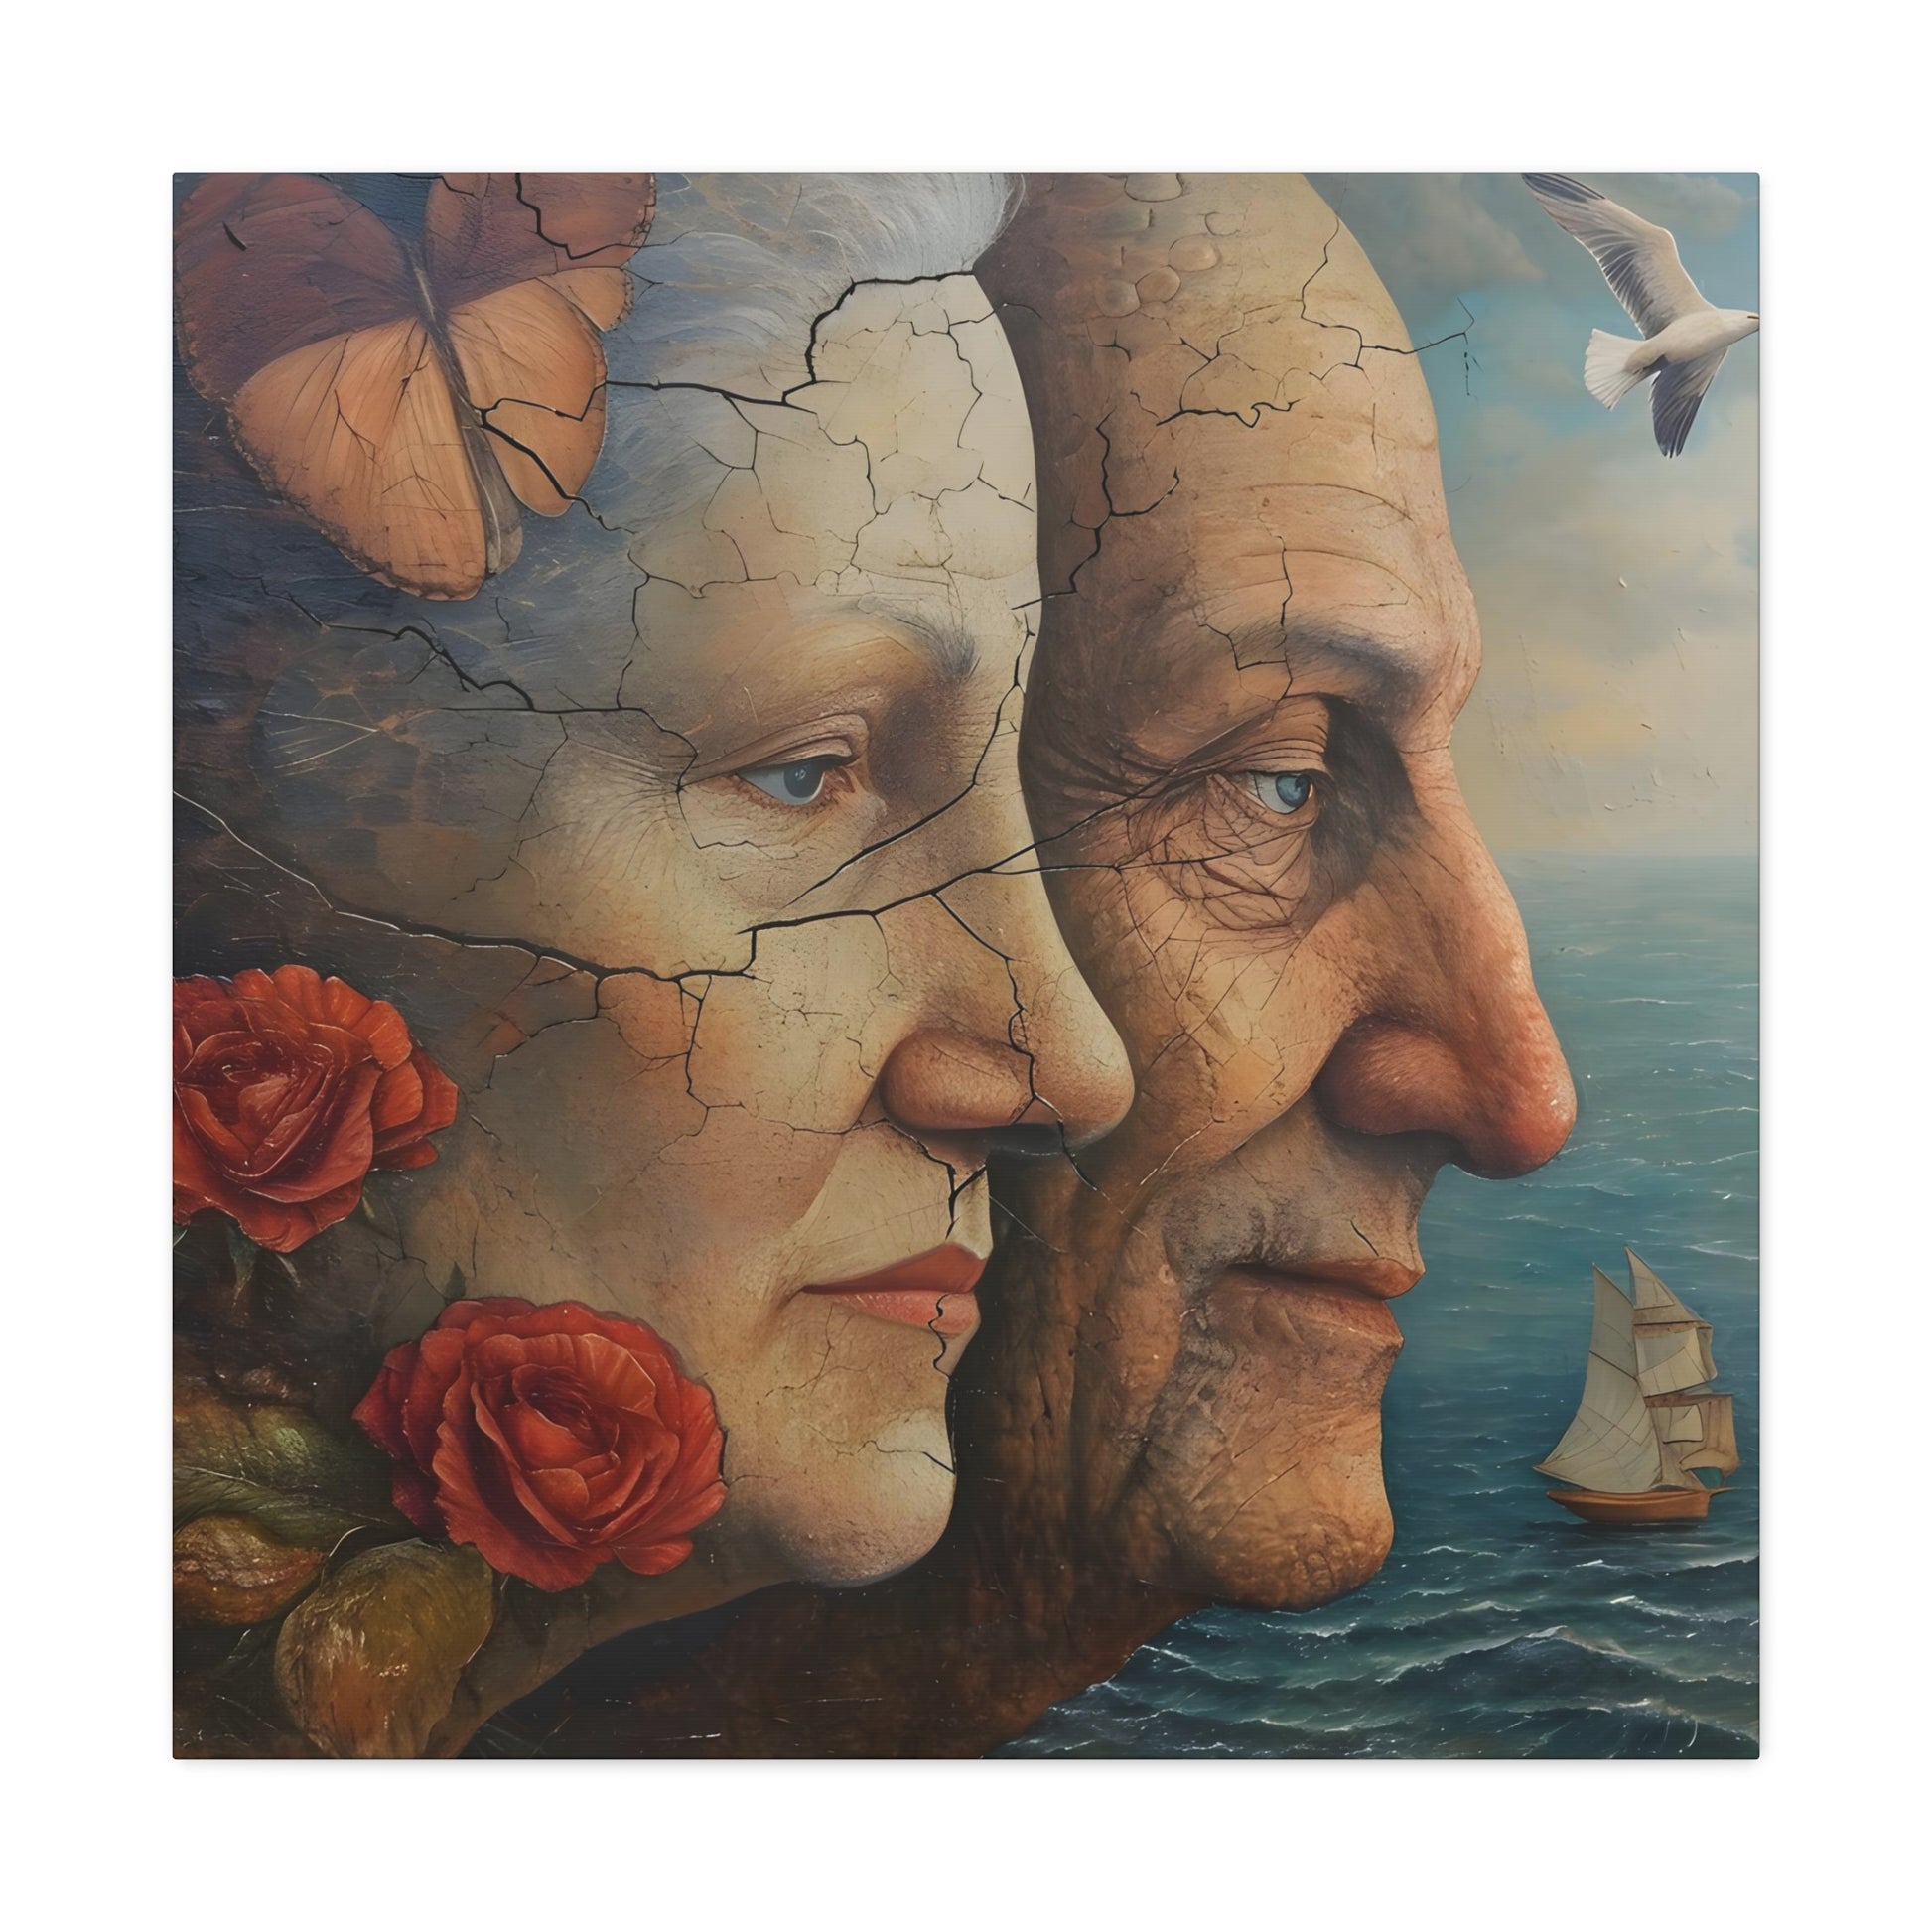 image 2 Evocative painting by Alteo Marin depicting two faces, symbolizing different life stages or a shared lifetime. Features include a cracked texture representing life's experiences, a butterfly on a woman’s temple symbolizing transformation, roses for romance, a tranquil sea background with a sailing ship for life's journey, and a seagull representing freedom. Printed on 100% cotton fabric for vibrant detail.